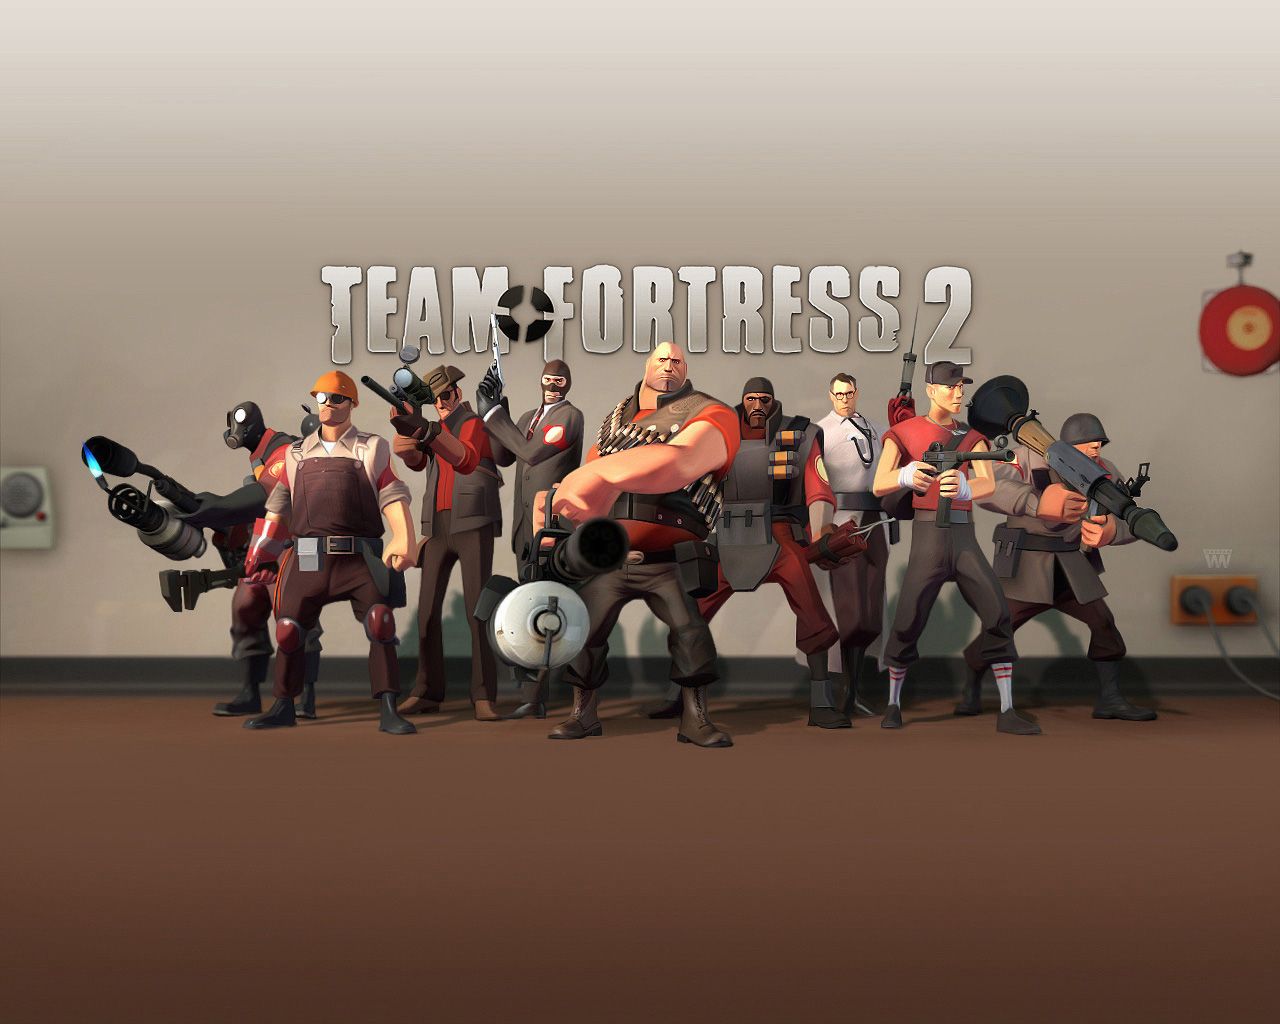 318 Team Fortress 2 HD Wallpapers | Backgrounds - Wallpaper Abyss